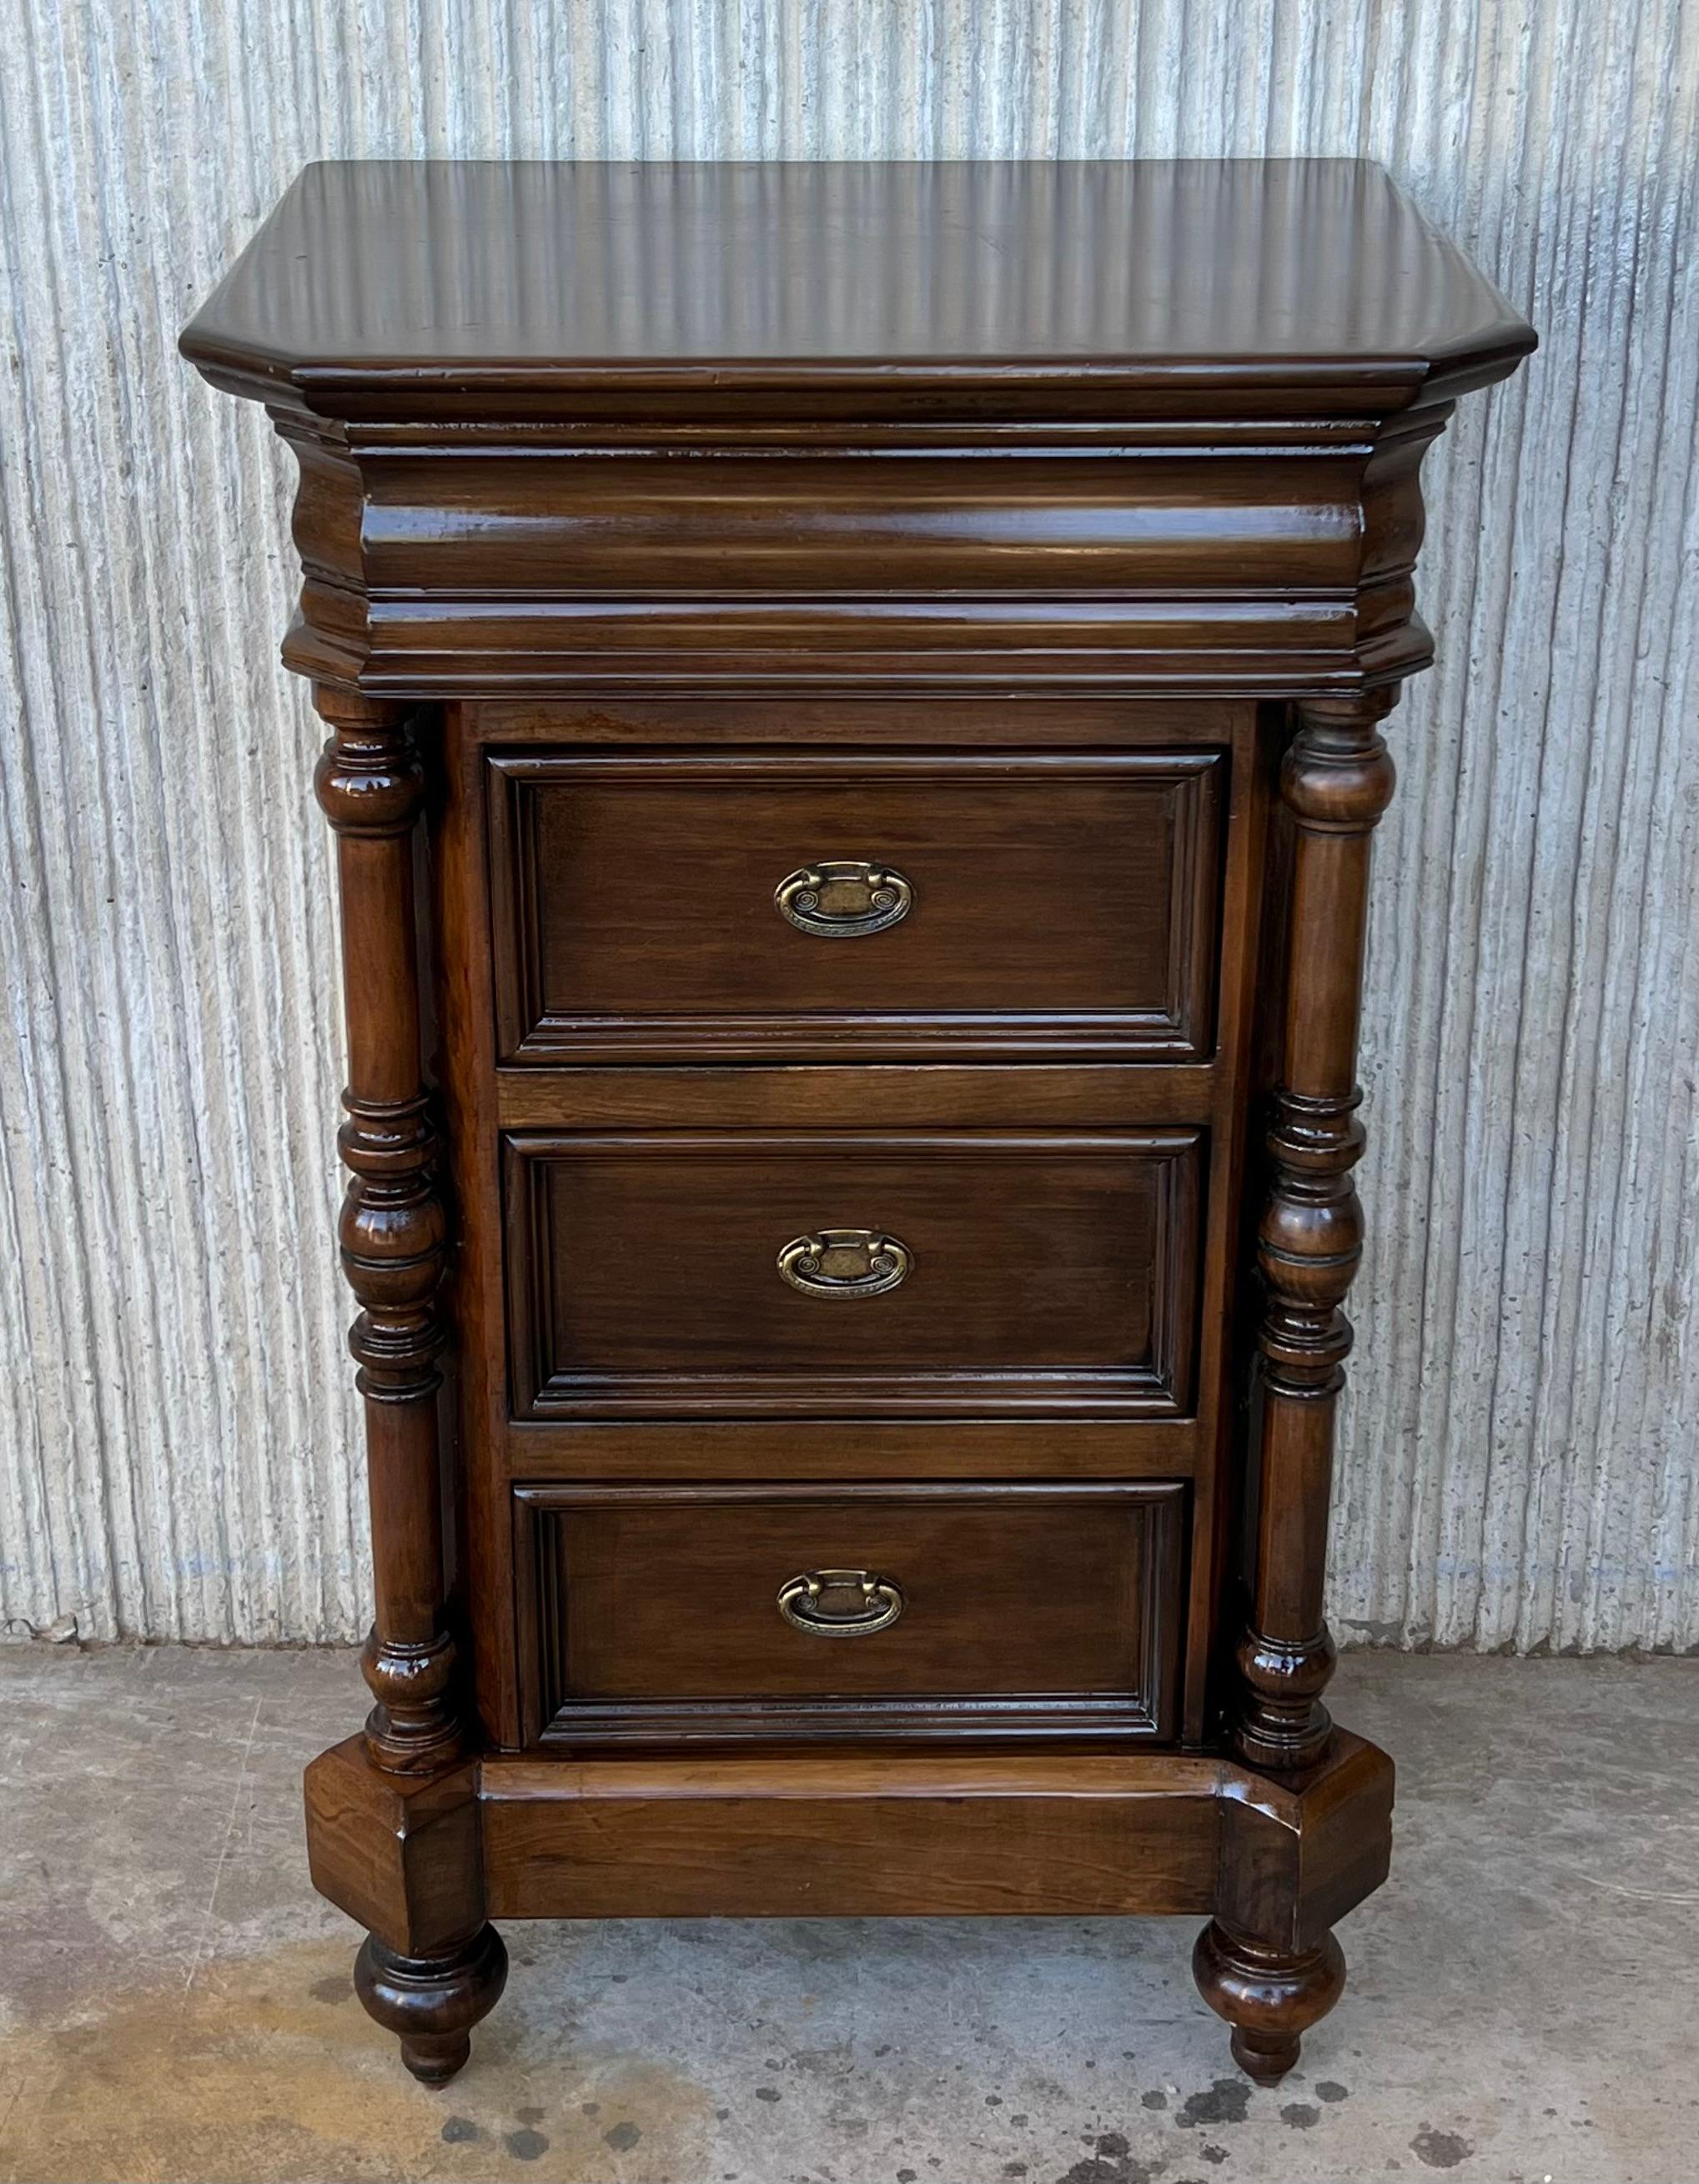 Pair of country house style bedside cabinets or nightstands. Tall cabinets with four drawers plenty of room for storage. Possibly Swedish. Highly desirable pieces and multifunctional not just as bedside cabinets.